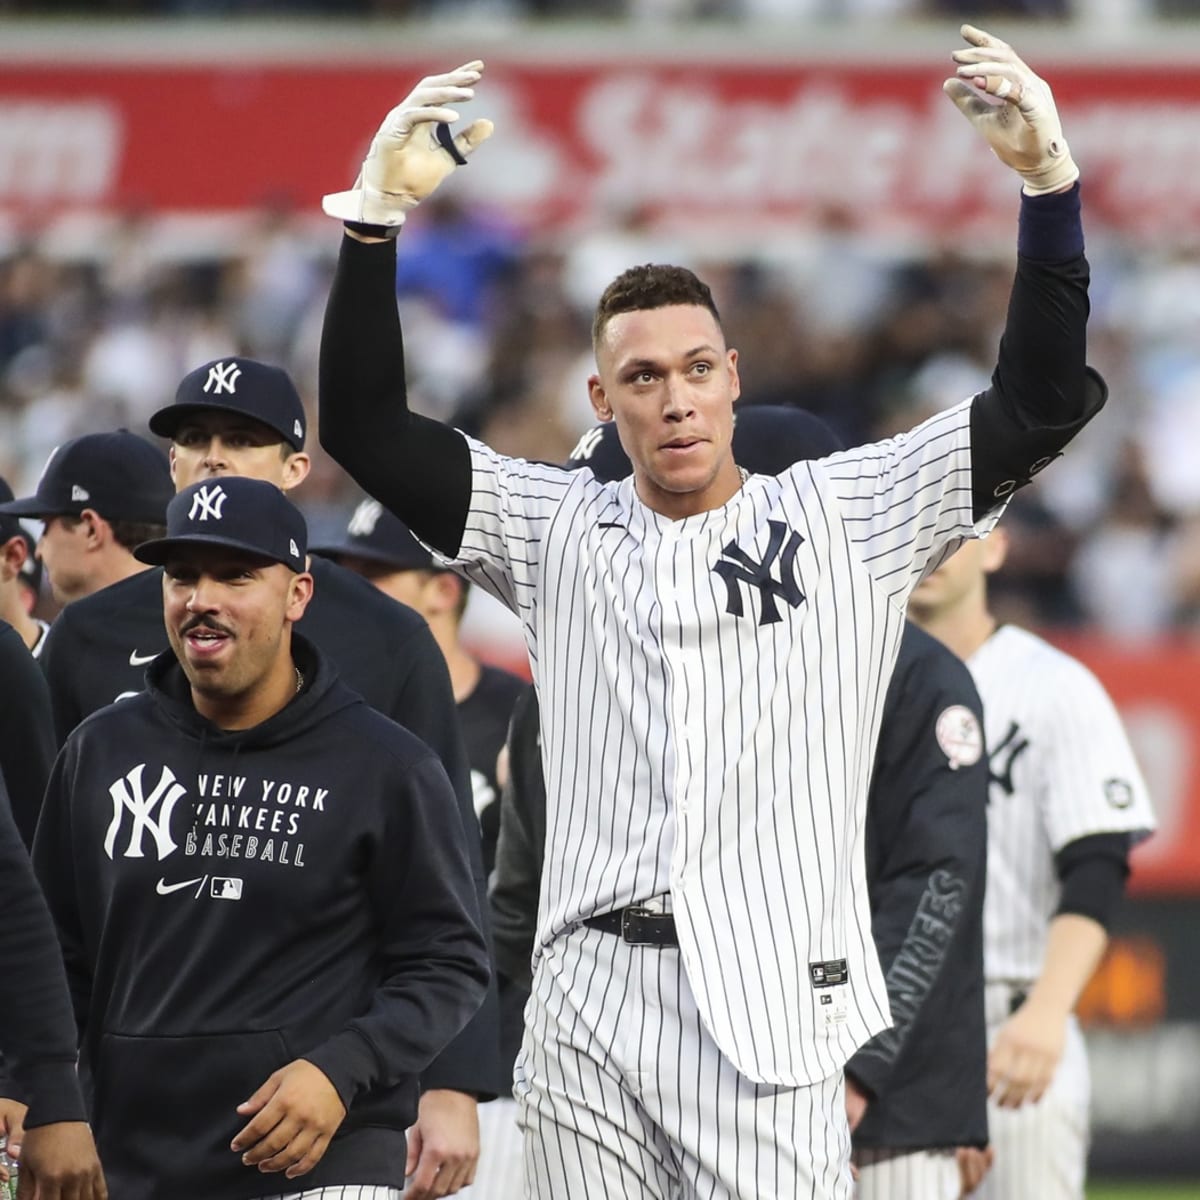 Fresno State to Retire Aaron Judge's Jersey, Honor Yankees Star at